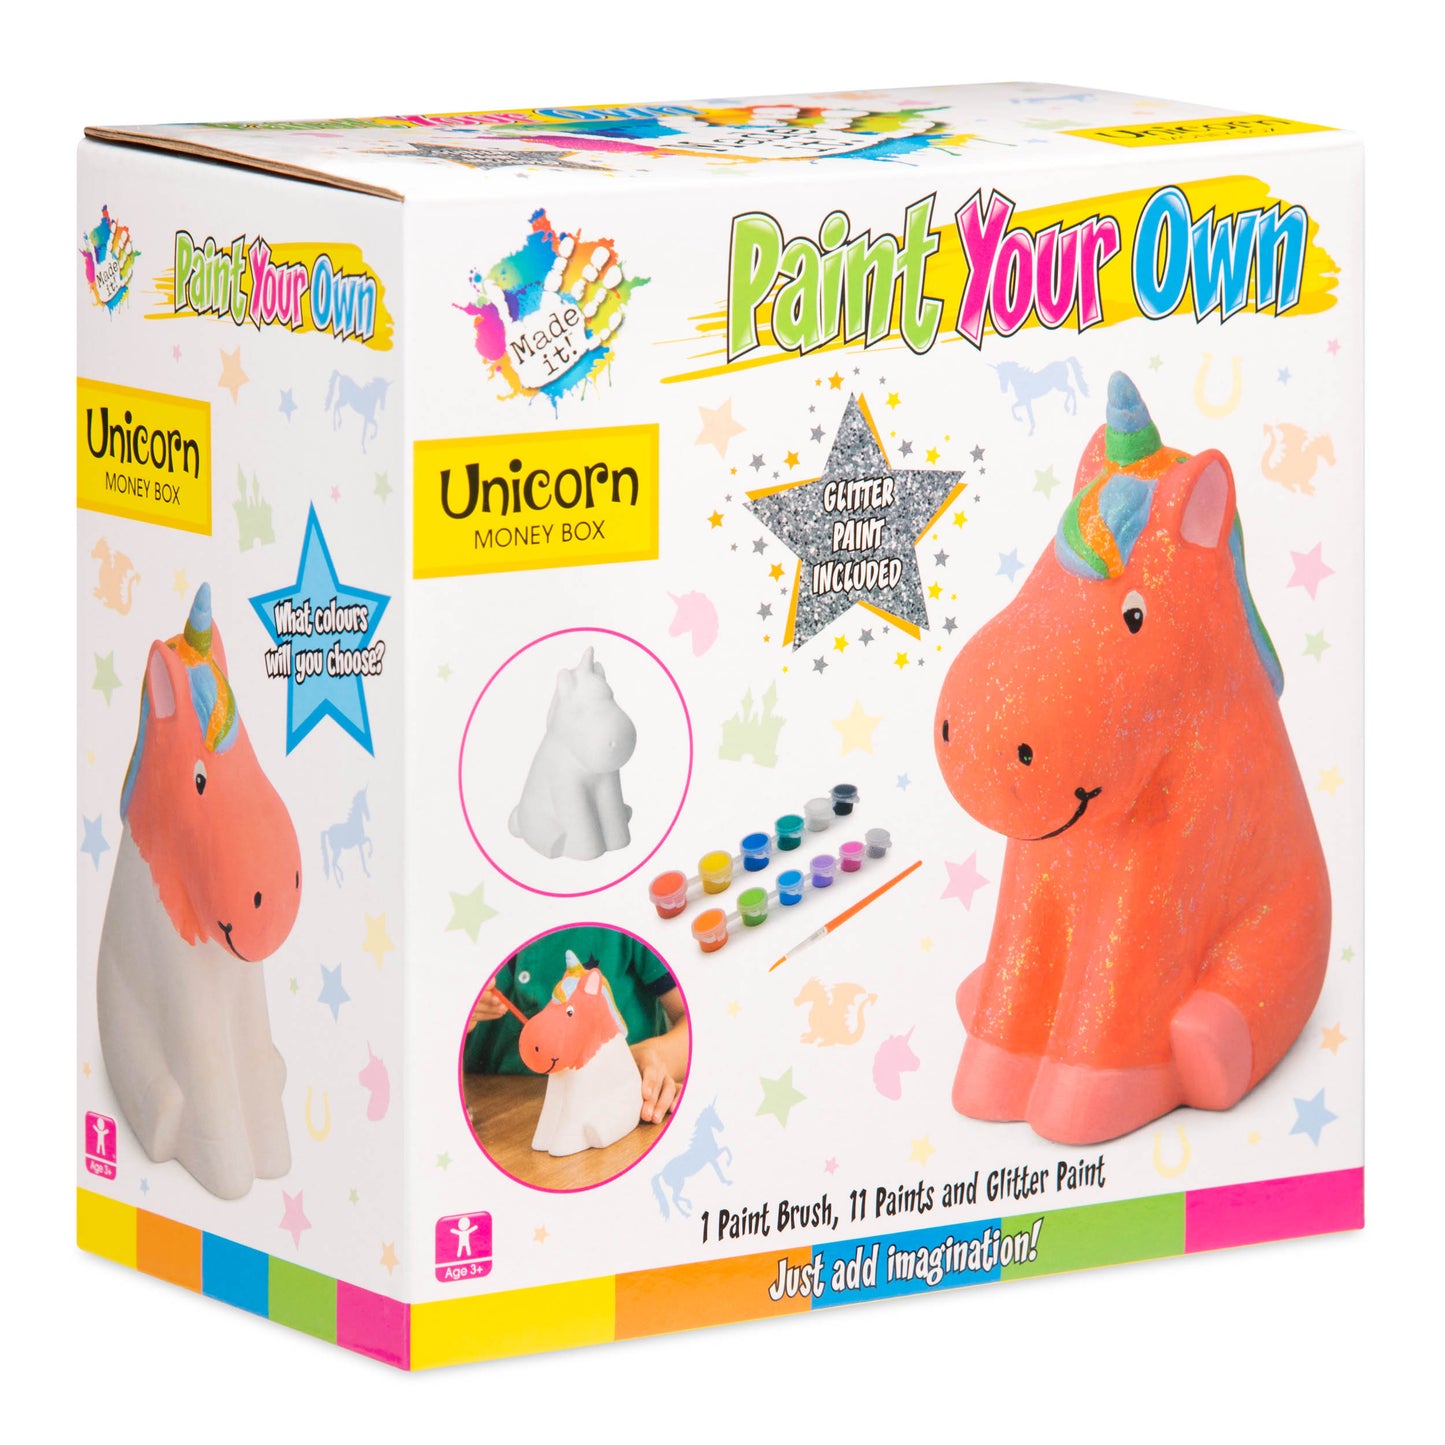 MADE IT! PAINT YOUR OWN UNICORN - Rich Kids Playground